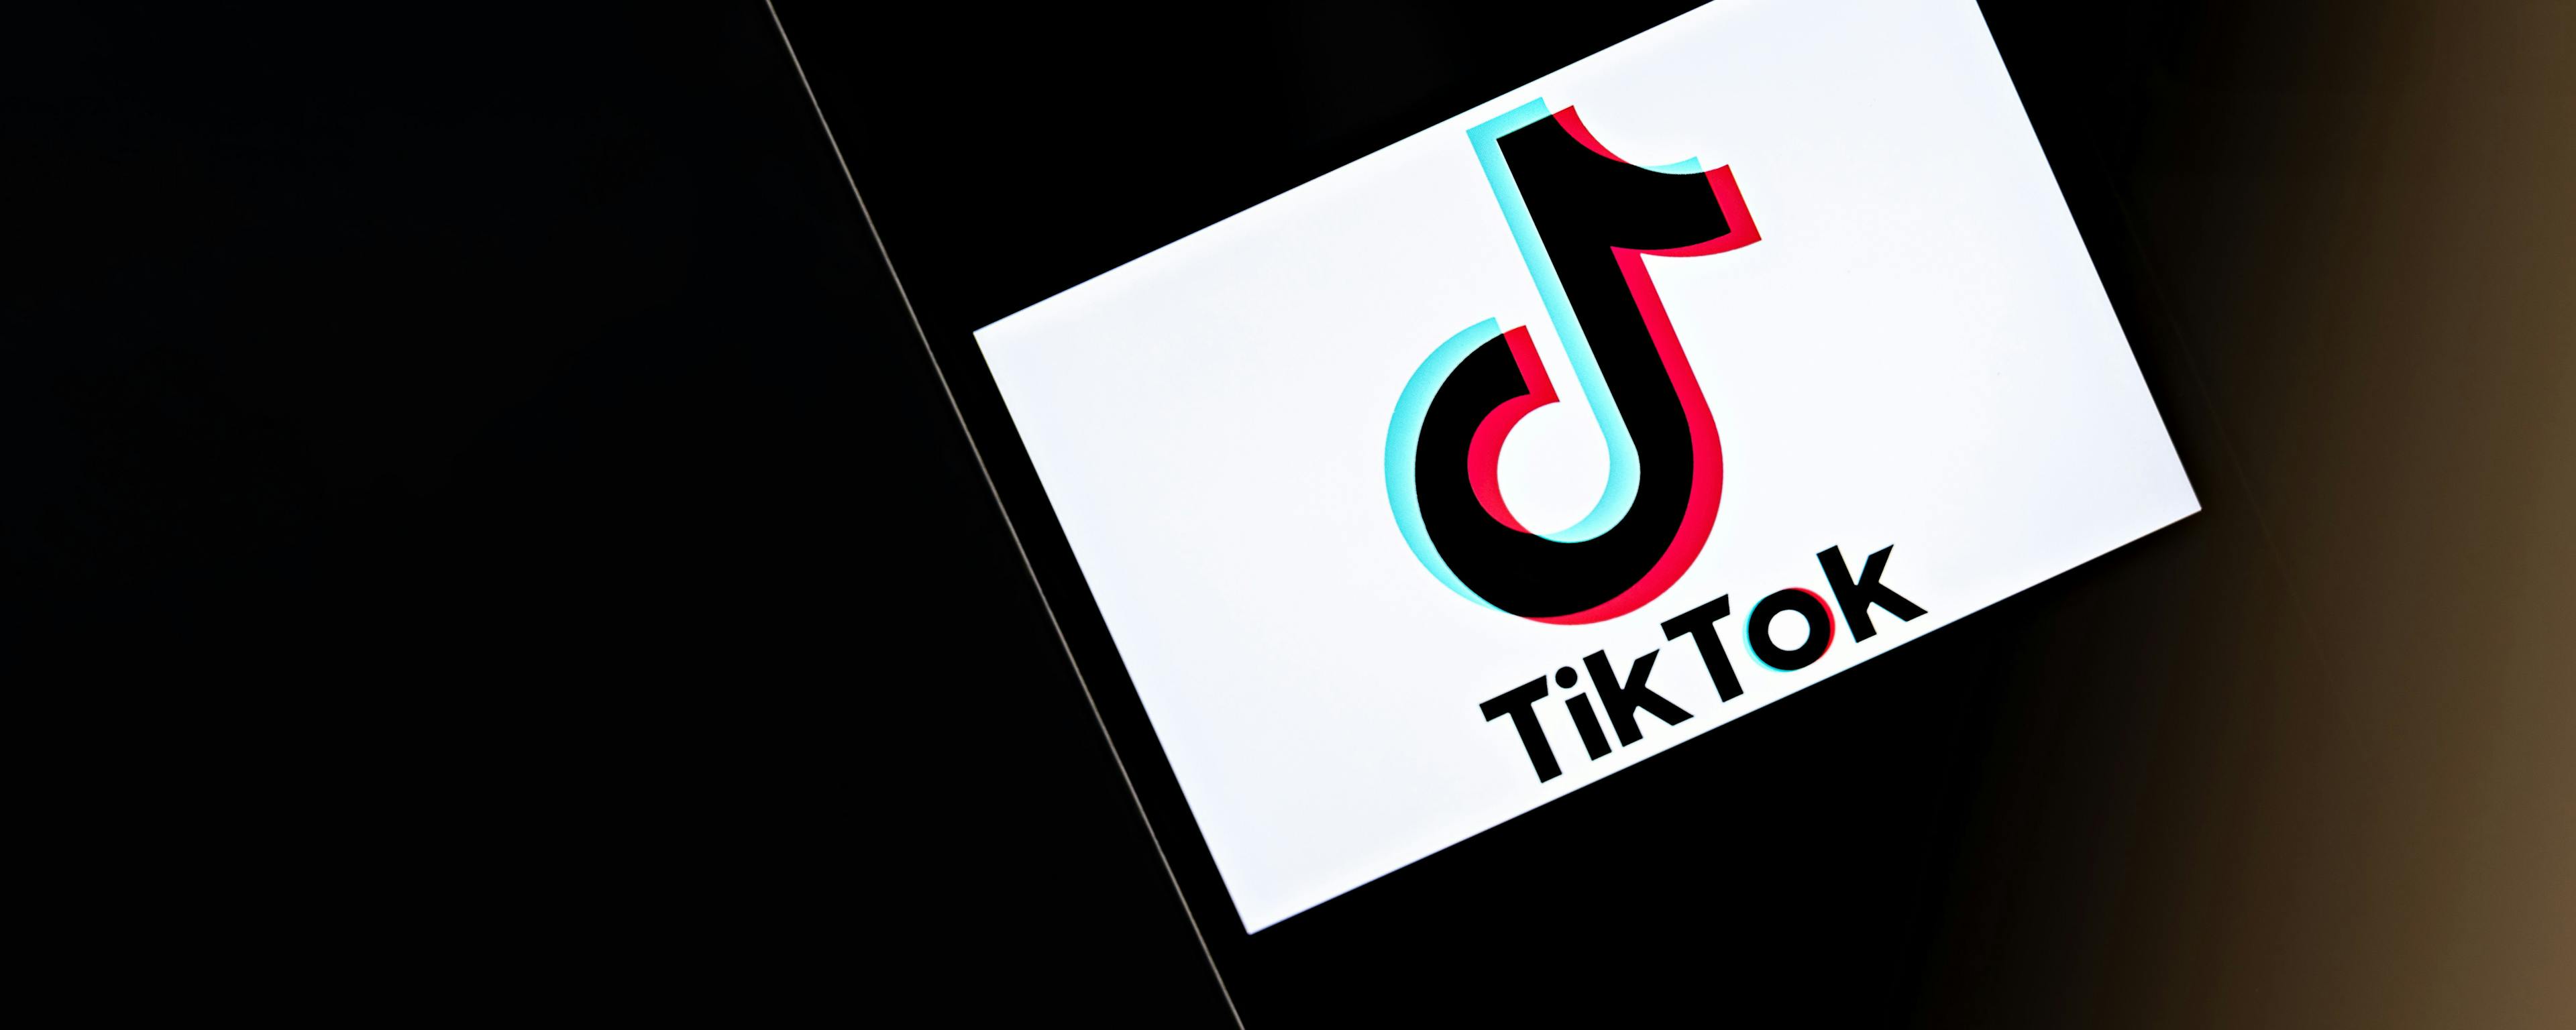 What TikTok could mean for adolescent mental health